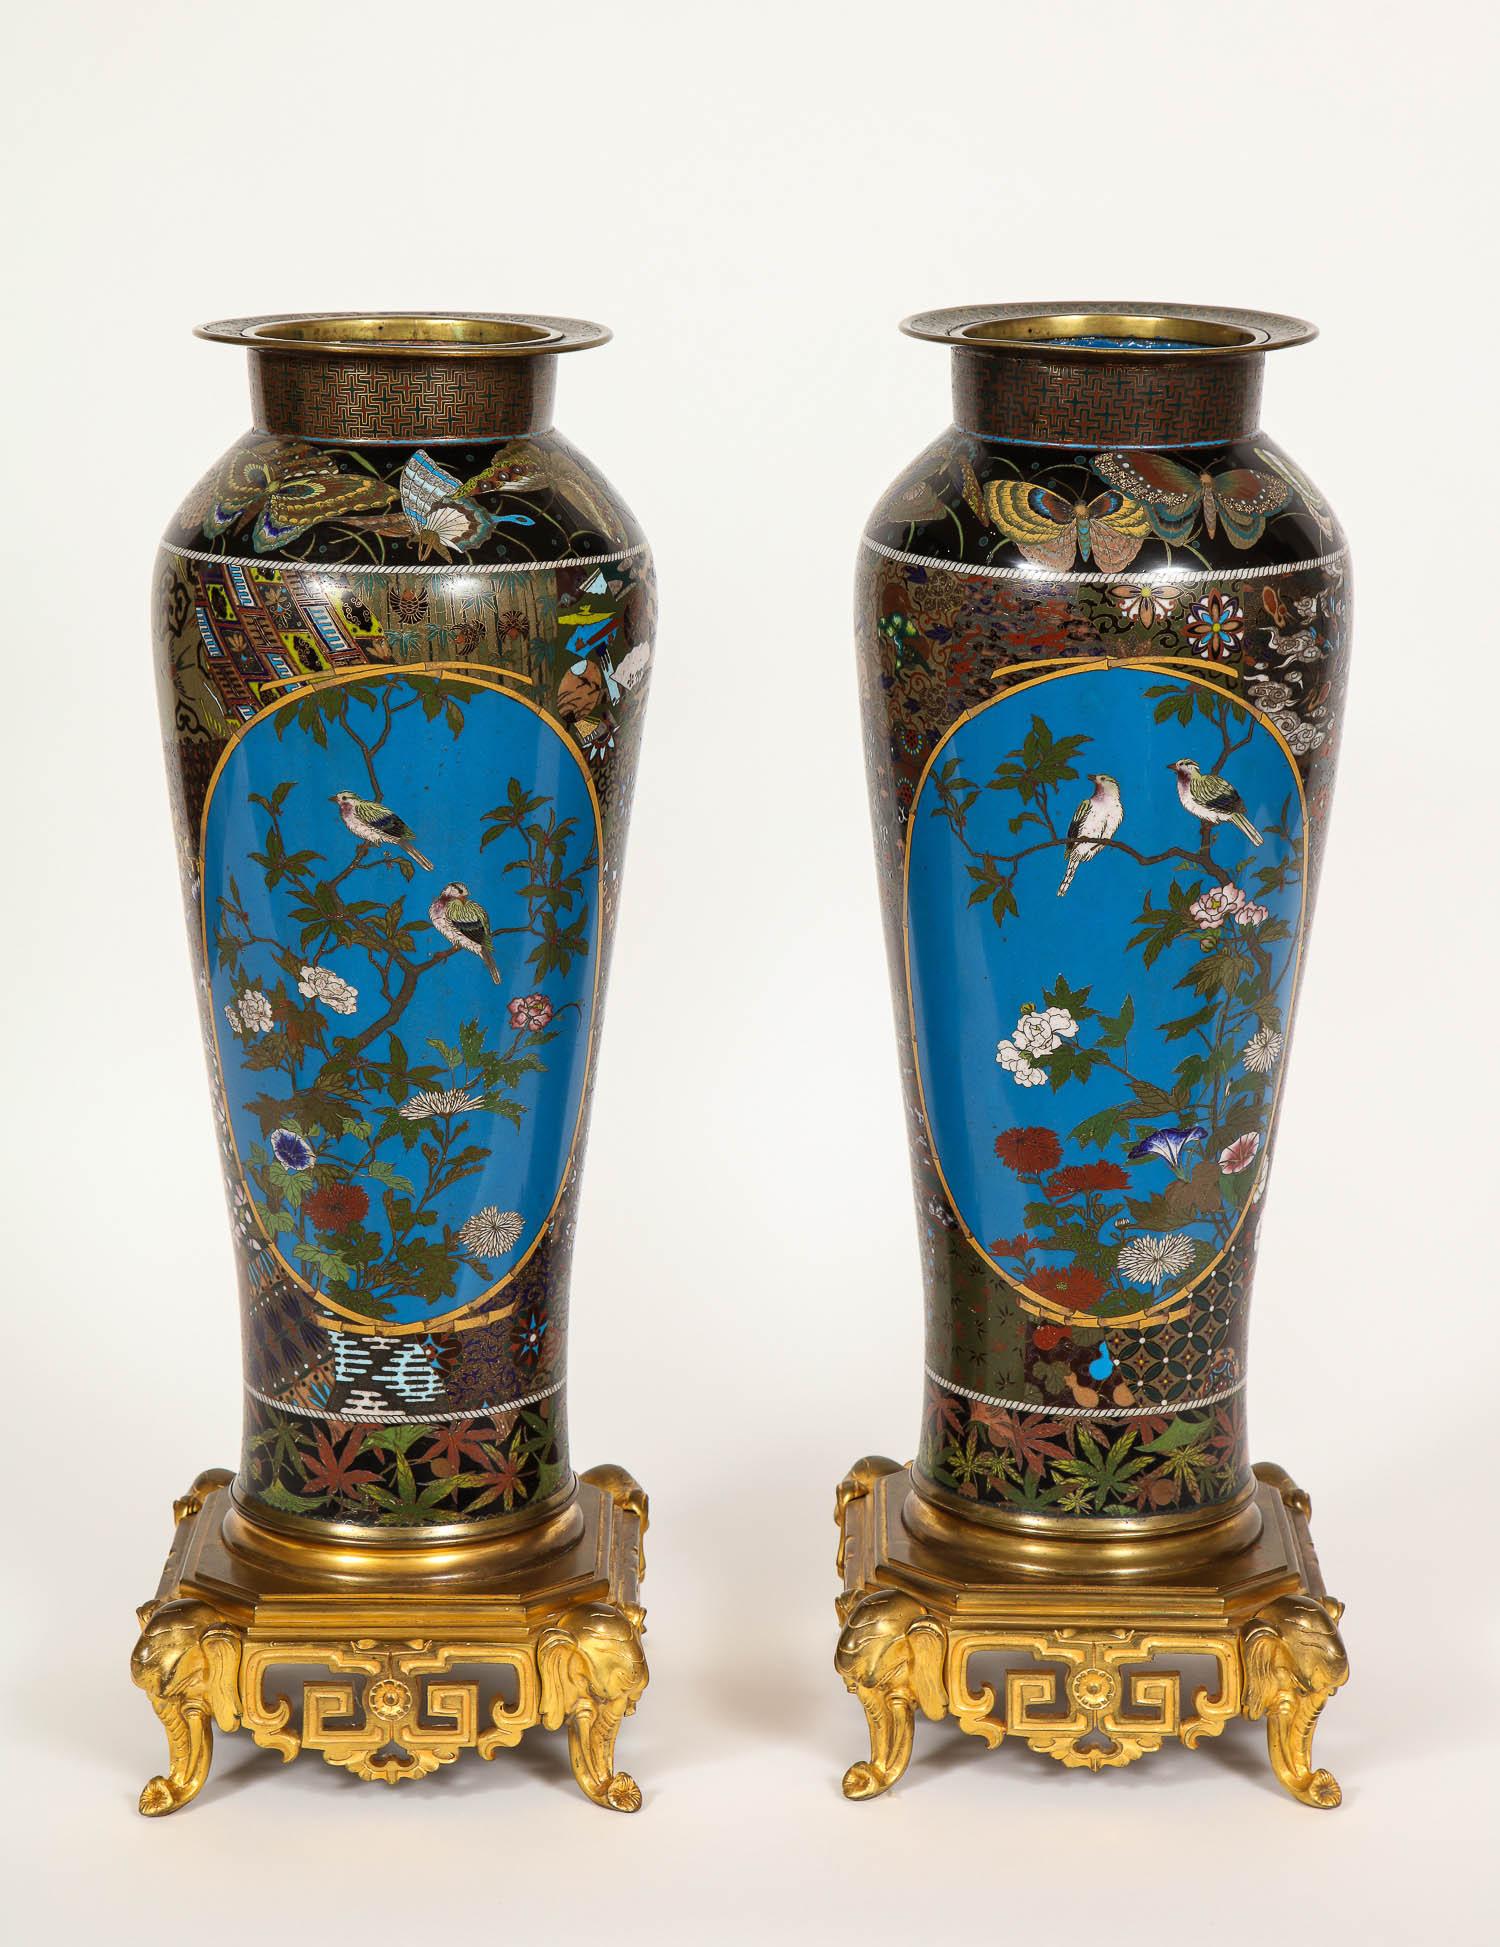 A magnificent large pair of Meji period Japanese cloisonné thousand butterfly vases with French Barbedienne ormolu mounted bases in the chinoiserie taste. This gorgeous pair of Japanese cloisonné vases are of extraordinary craftsmanship. The